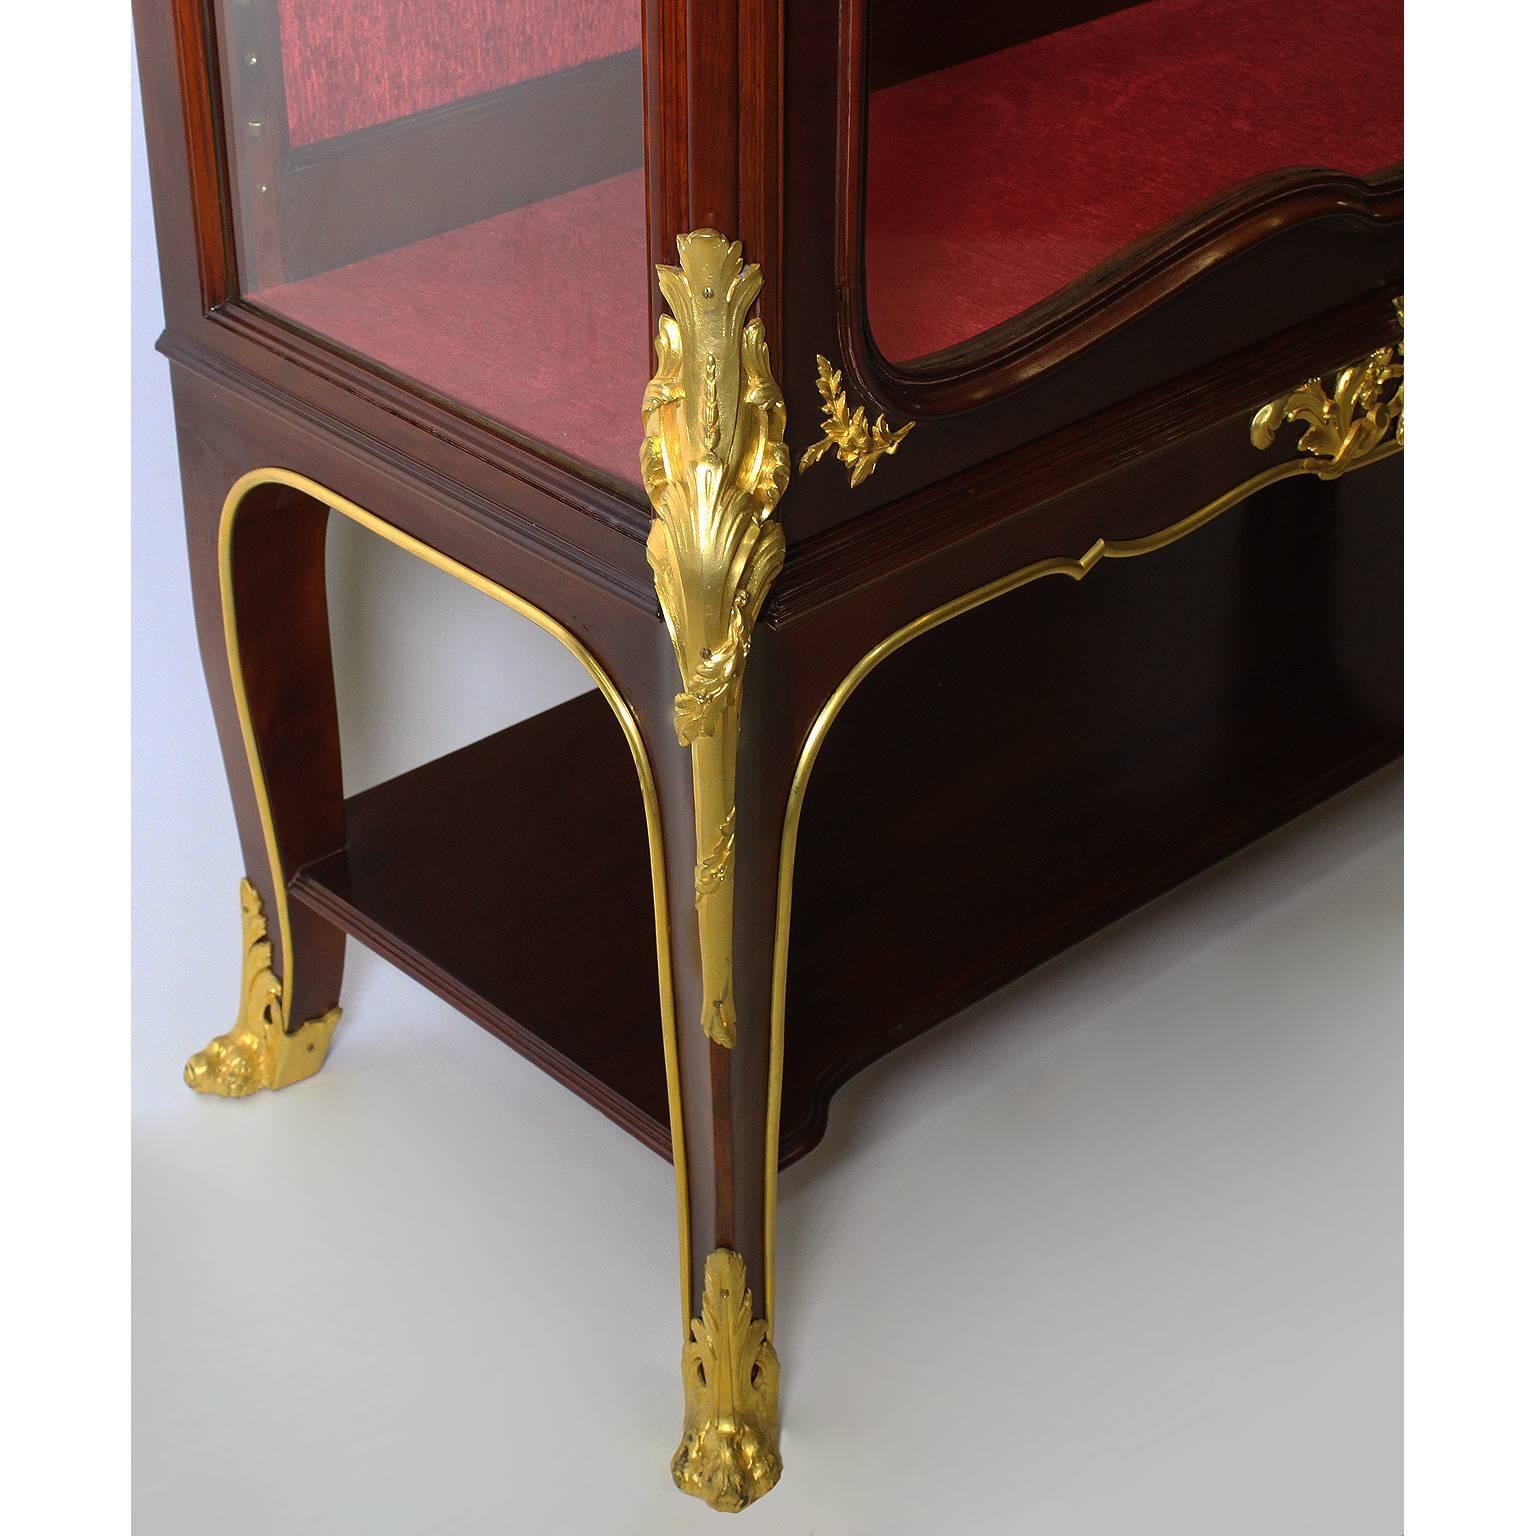 French, 19th-20th Century Louis XV Style Gilt Bronze-Mounted Vitrine by Haentges For Sale 2